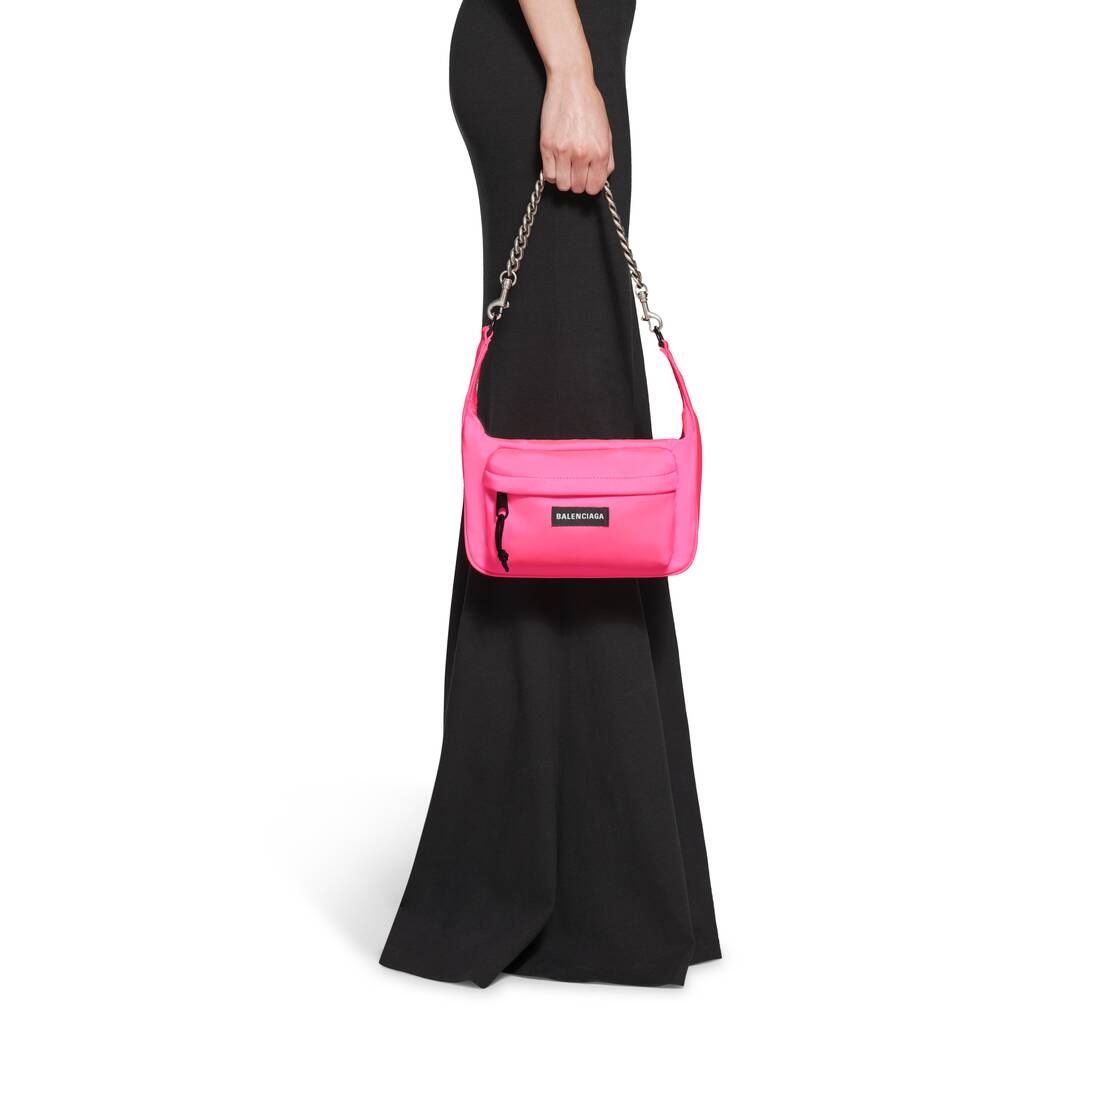 Raver Medium Bag With Chain in Fluo Pink - 2